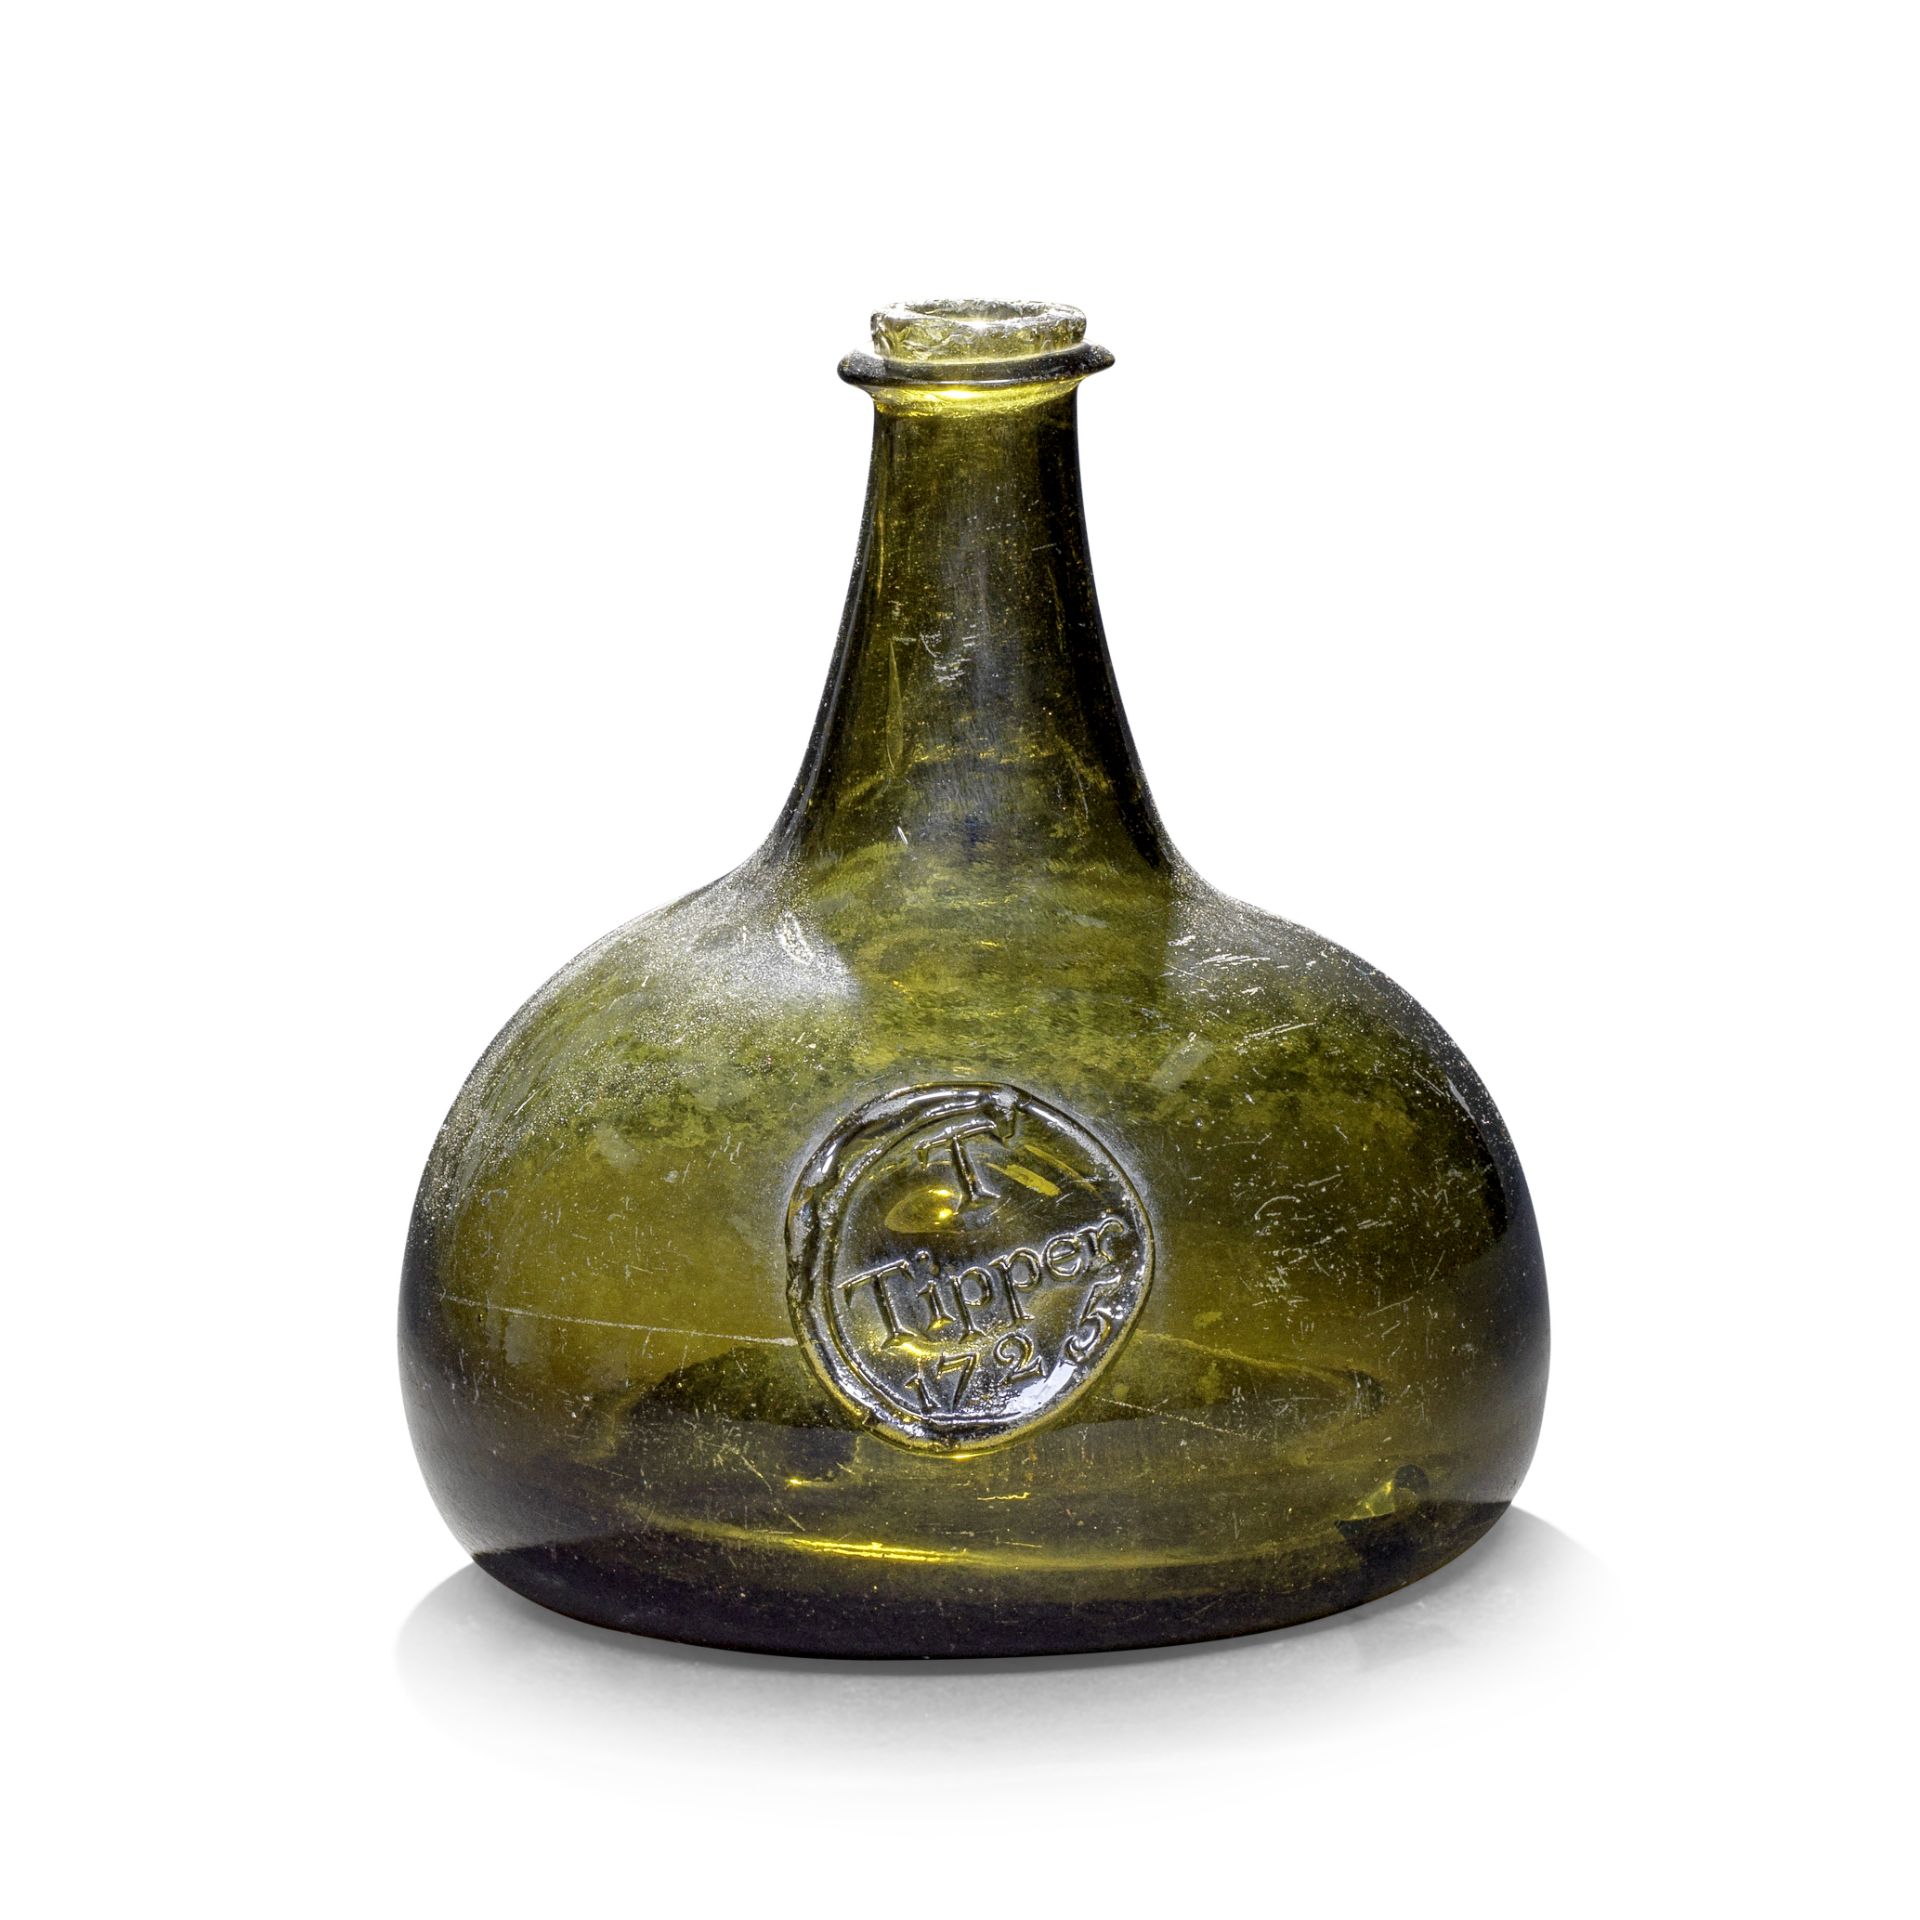 A very rare sealed half size 'Onion' wine bottle, dated 1725